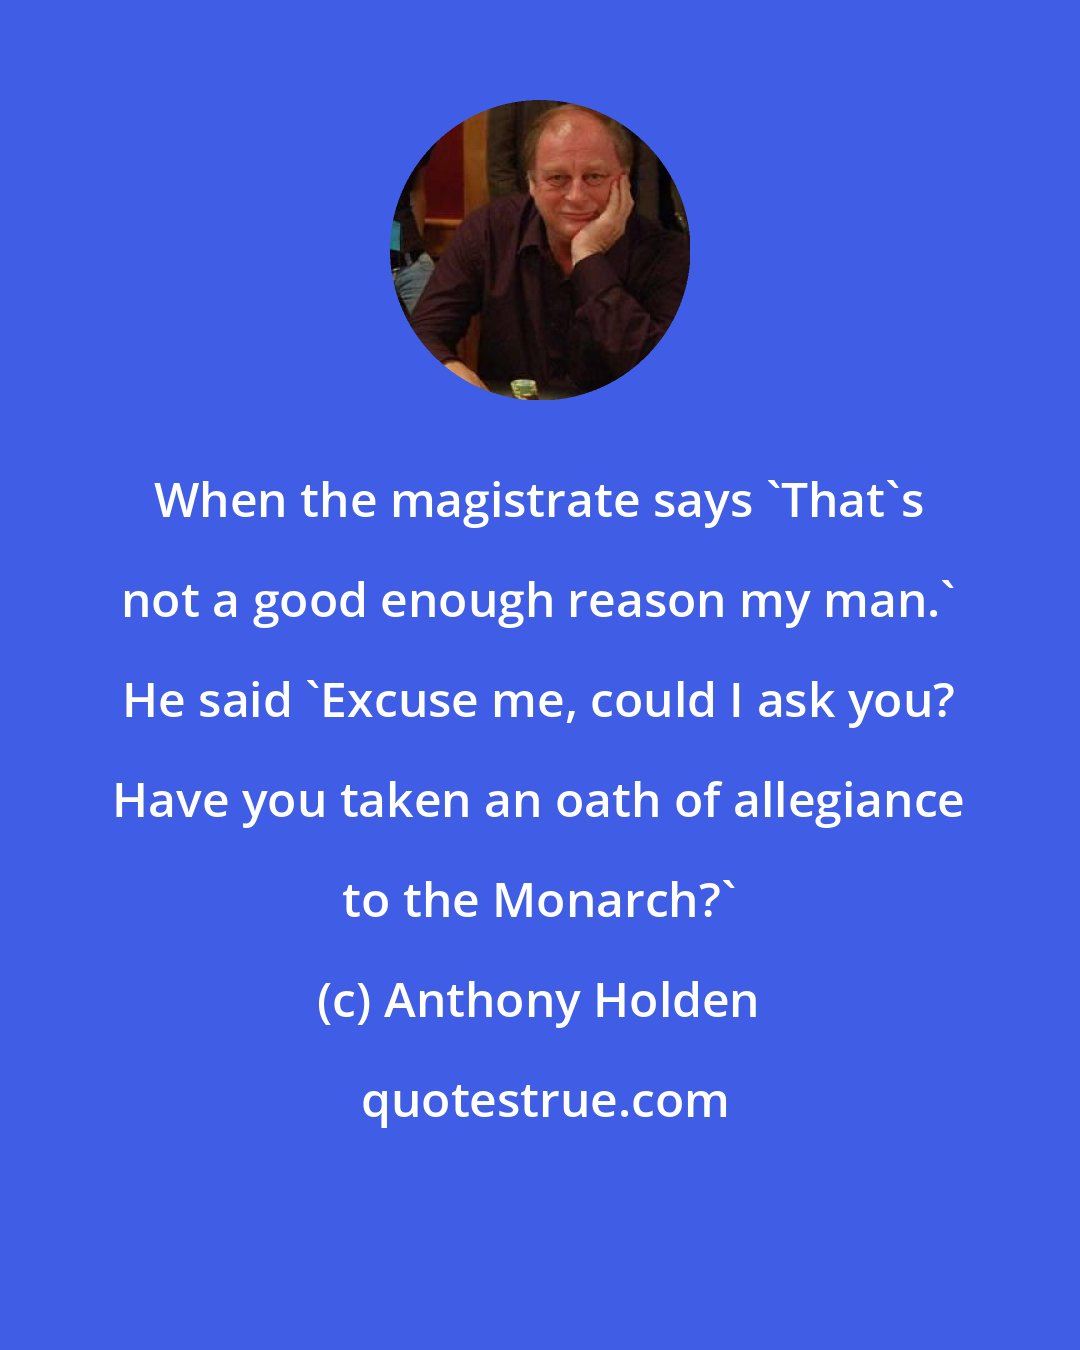 Anthony Holden: When the magistrate says 'That's not a good enough reason my man.' He said 'Excuse me, could I ask you? Have you taken an oath of allegiance to the Monarch?'